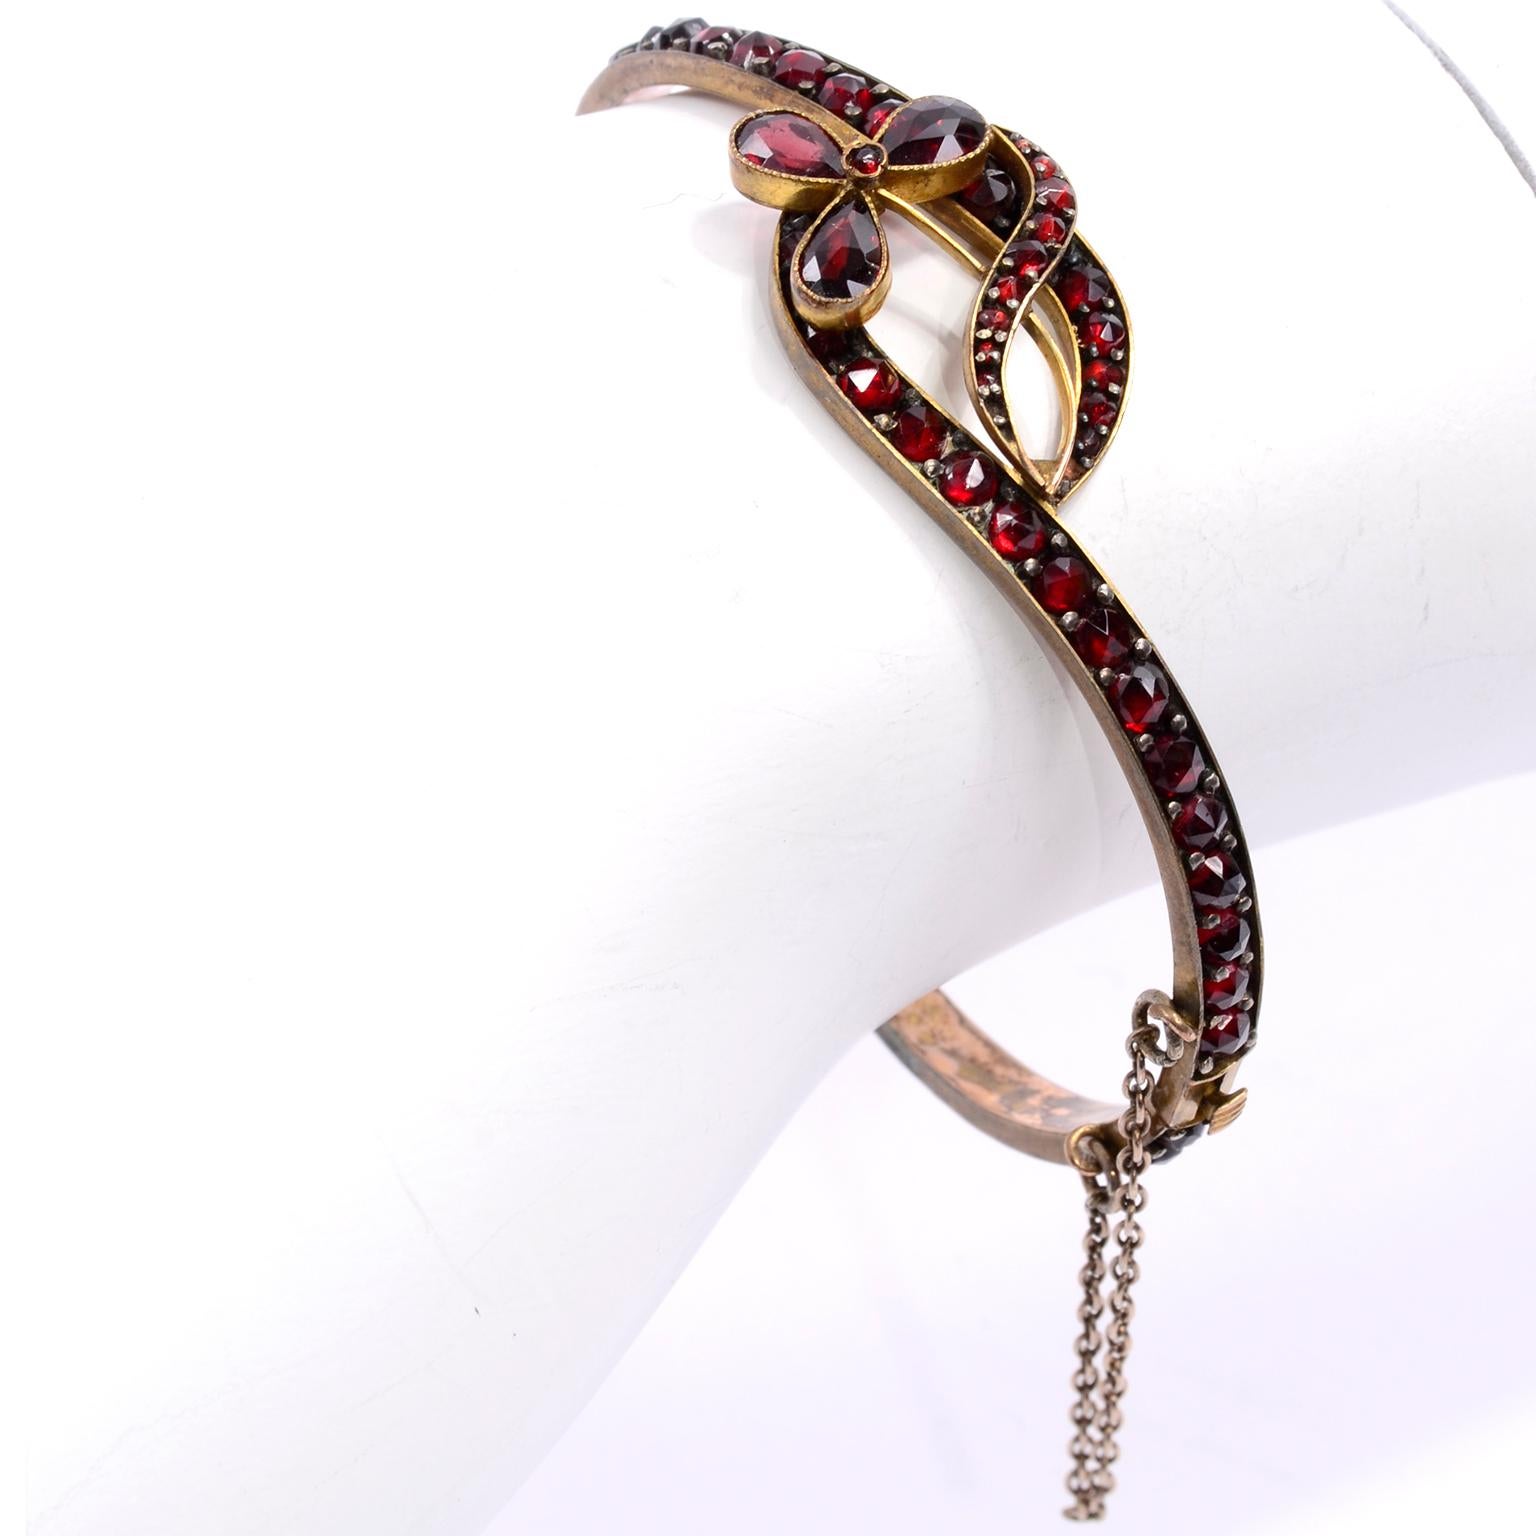 This is a pretty antique 19th Century Victorian bohemian garnet bracelet in a bangle style with a push clasp and chain. The design creates a little loop and a flower.  There is some wear/discoloration to the gold finish on the inside of the bangle